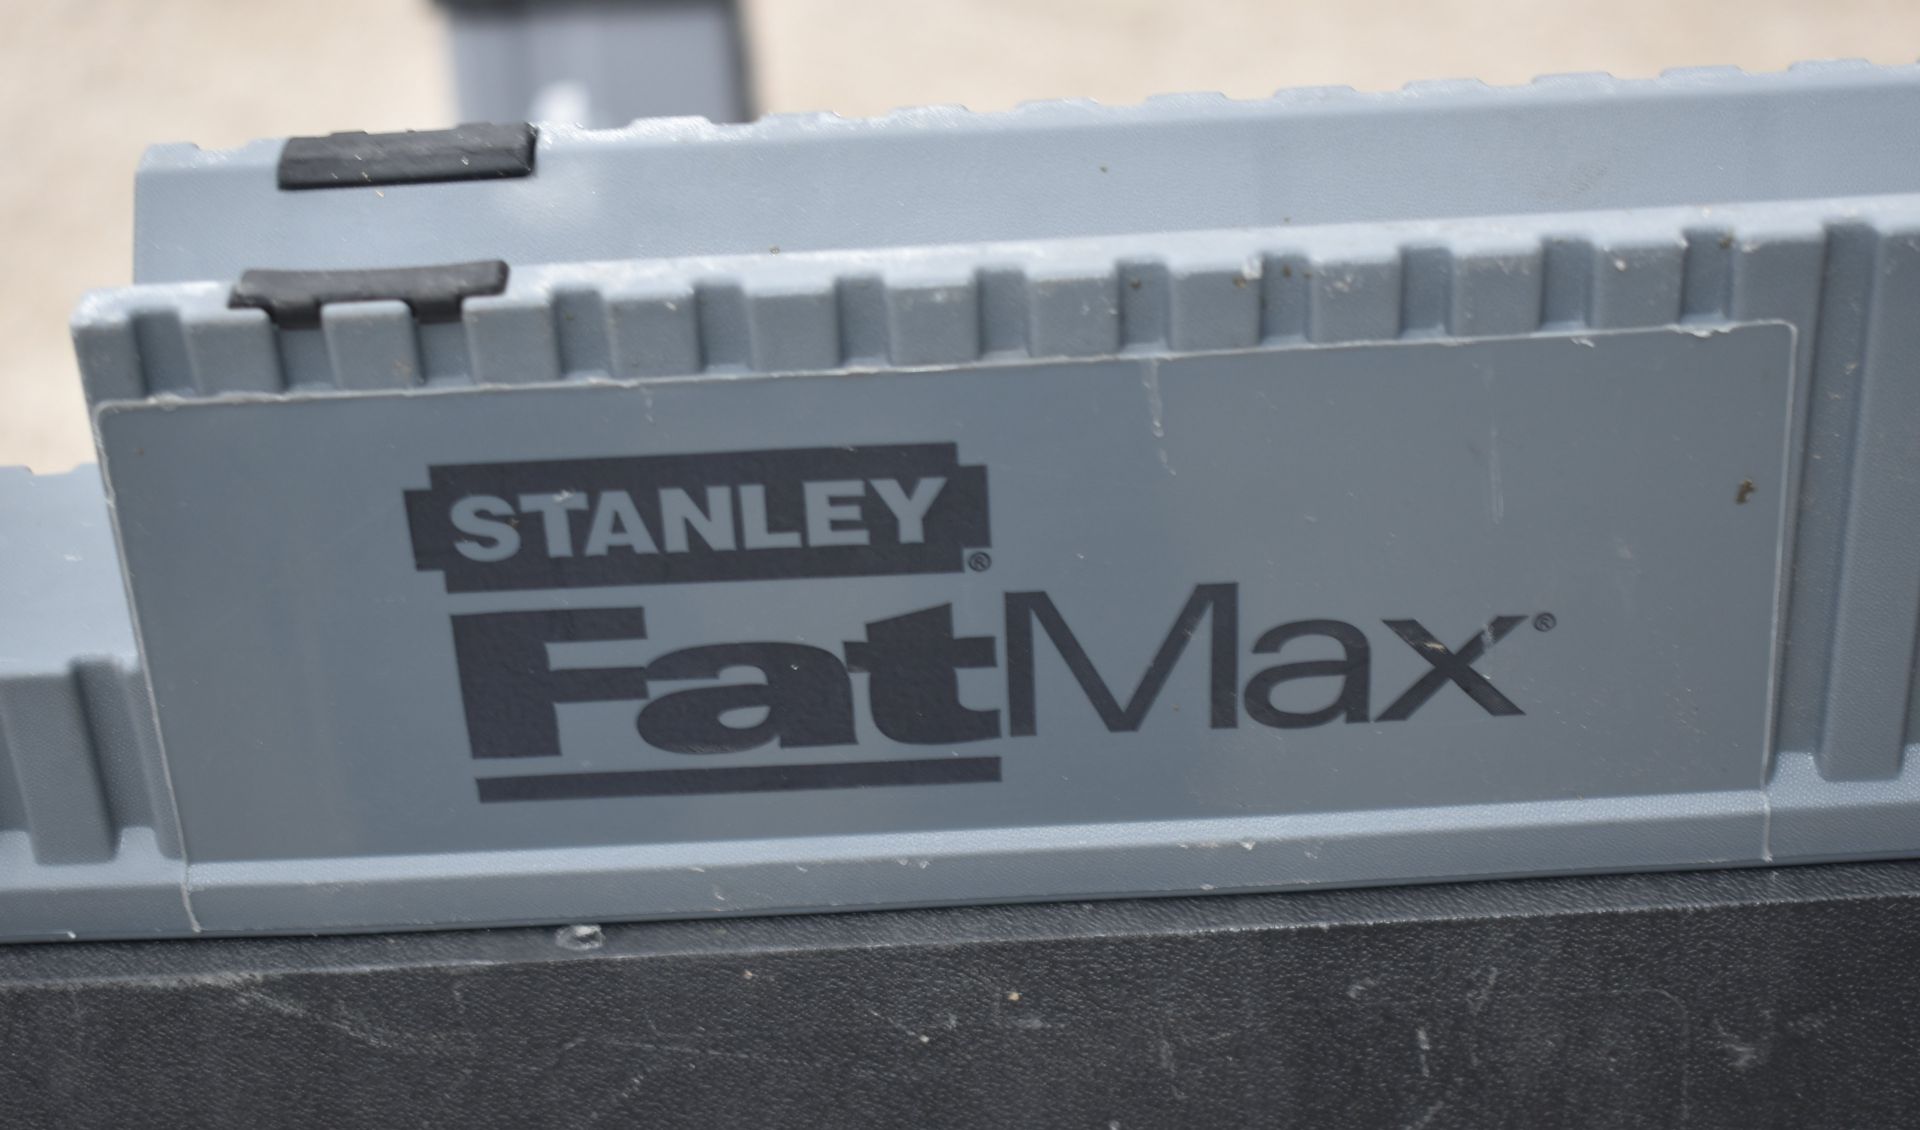 2 x STANLEY Fatmax Telescopic Saw Horses - 68(W) x 39(D) x 82(H) cms - RRP £172 - Ref: K236 - CL905 - Image 5 of 13